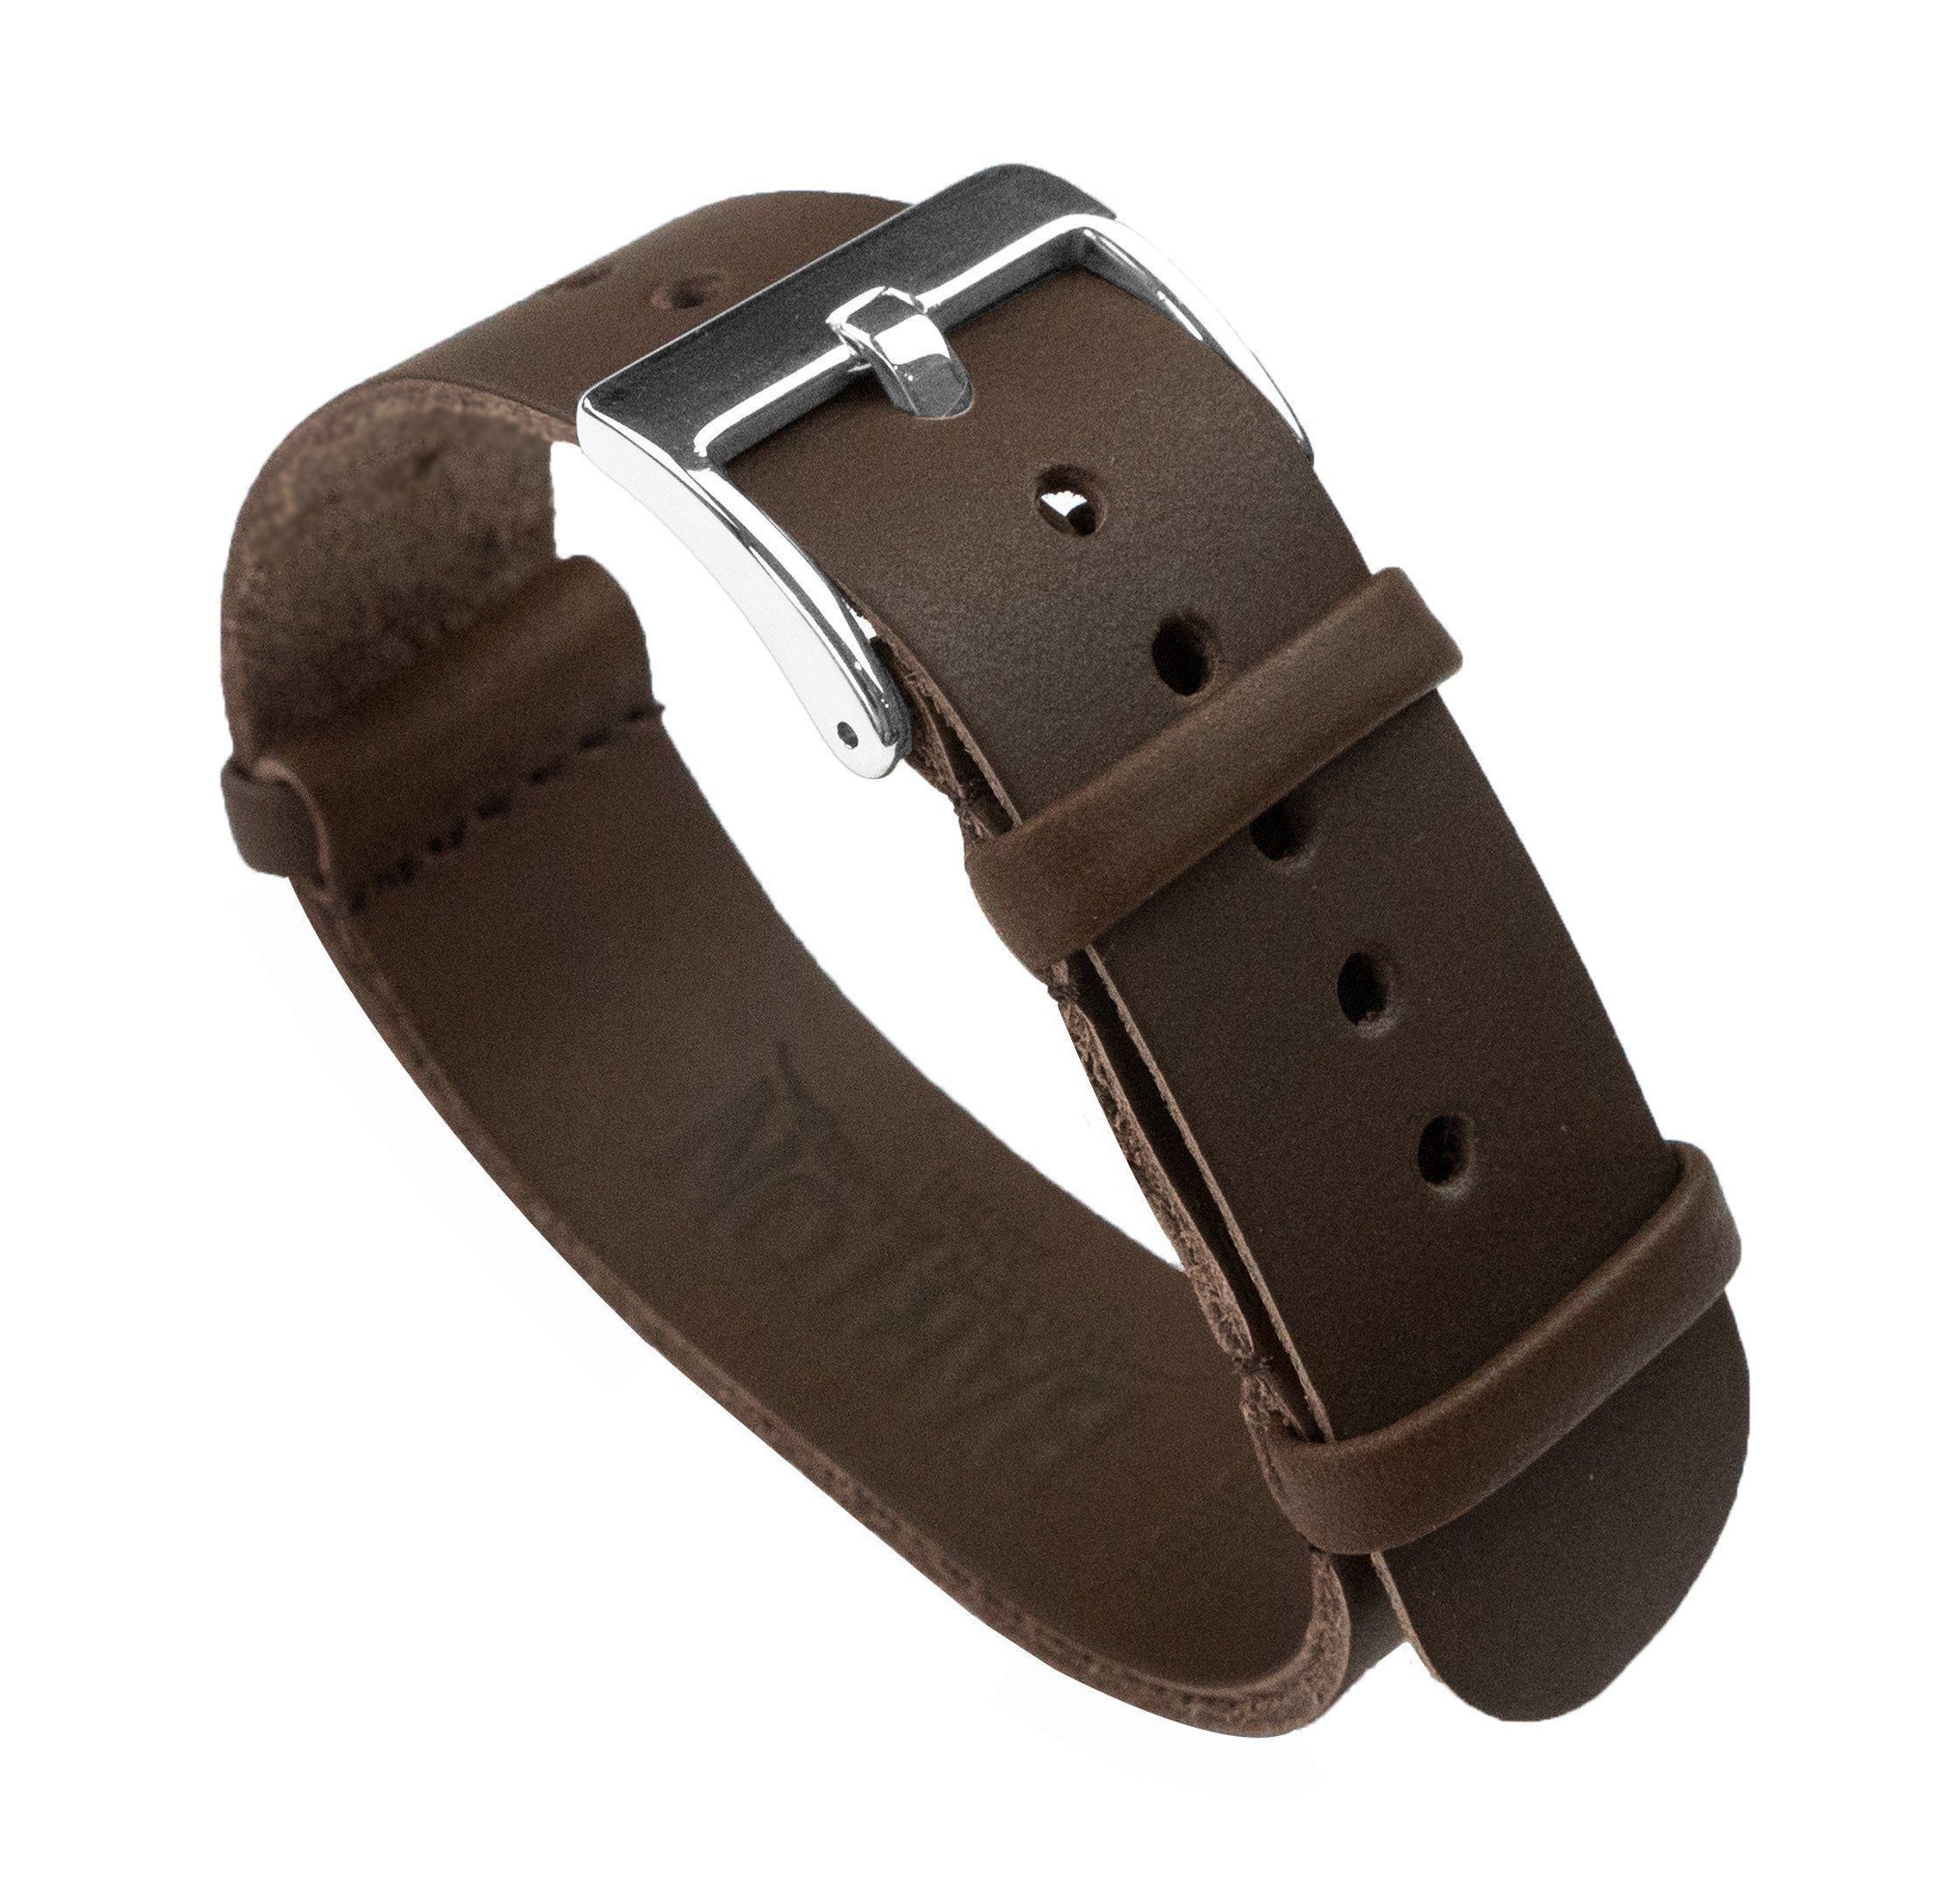 Leather NATO Style Watch | Leather NATO Strap BARTON Barton Watch Bands